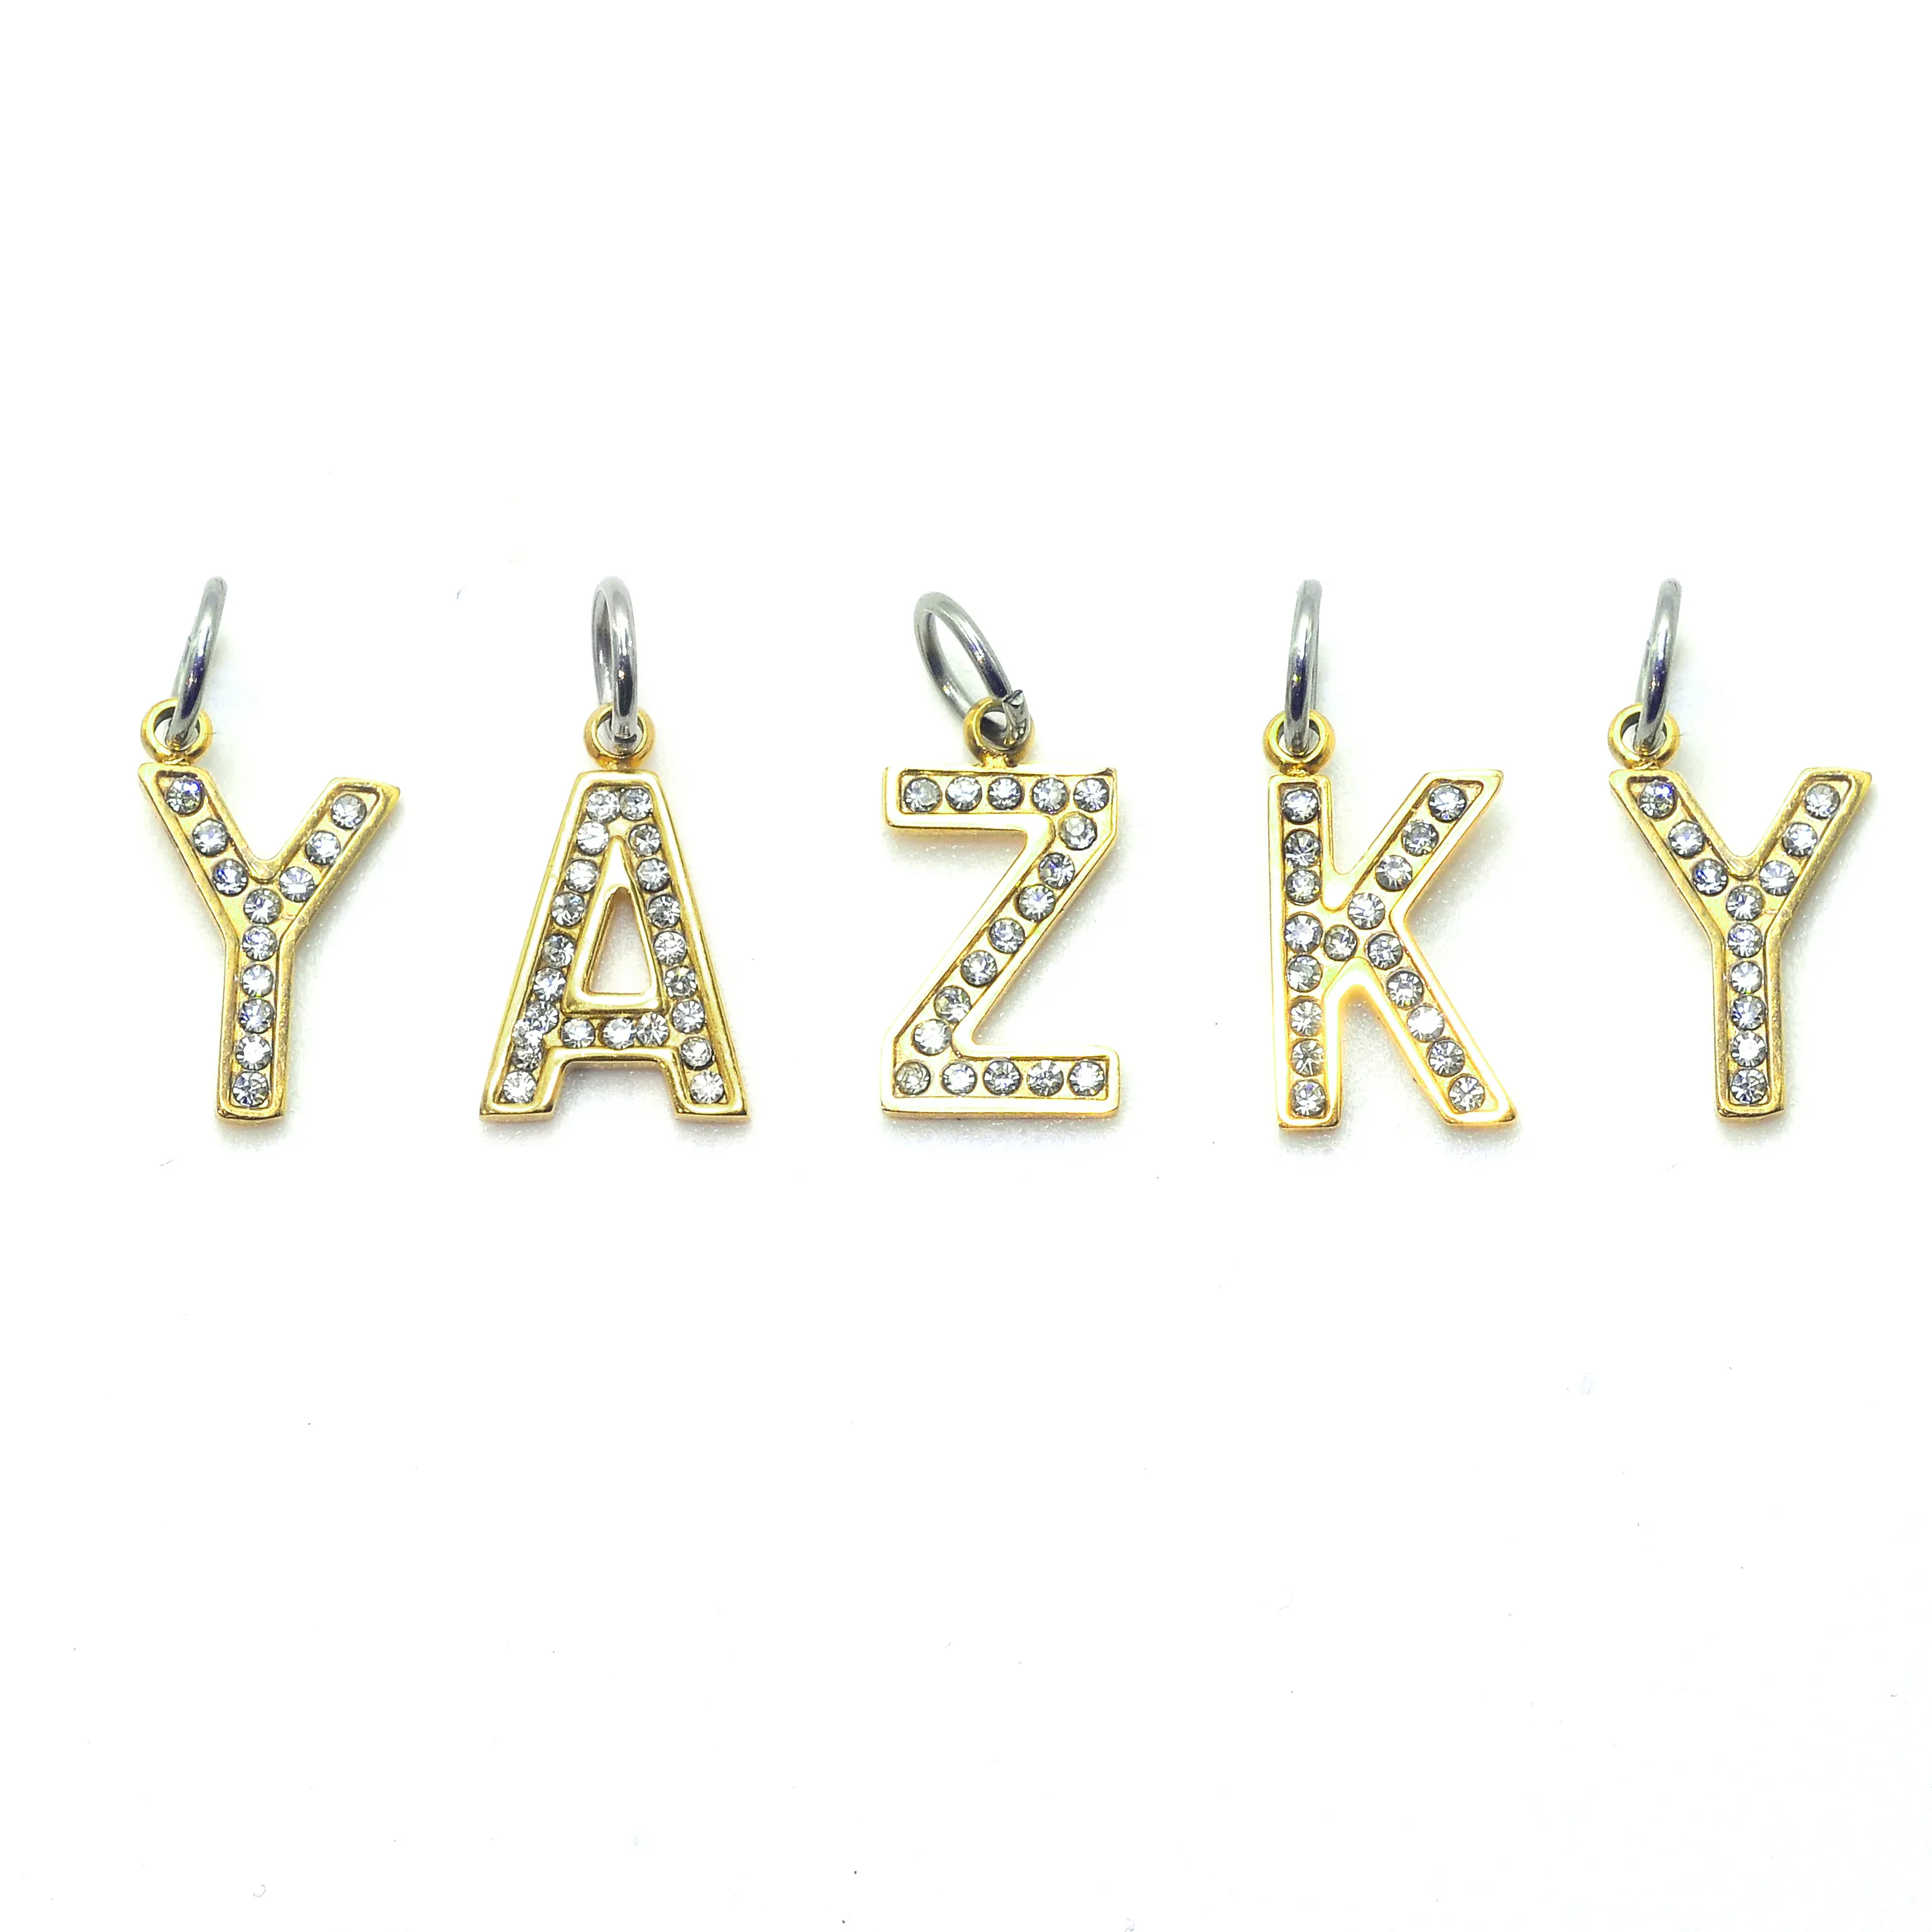 High quality Stainless Steel Gold Chain A-Z 26 Letters Pendant Initial Anklet Alphabet Pendant Necklace